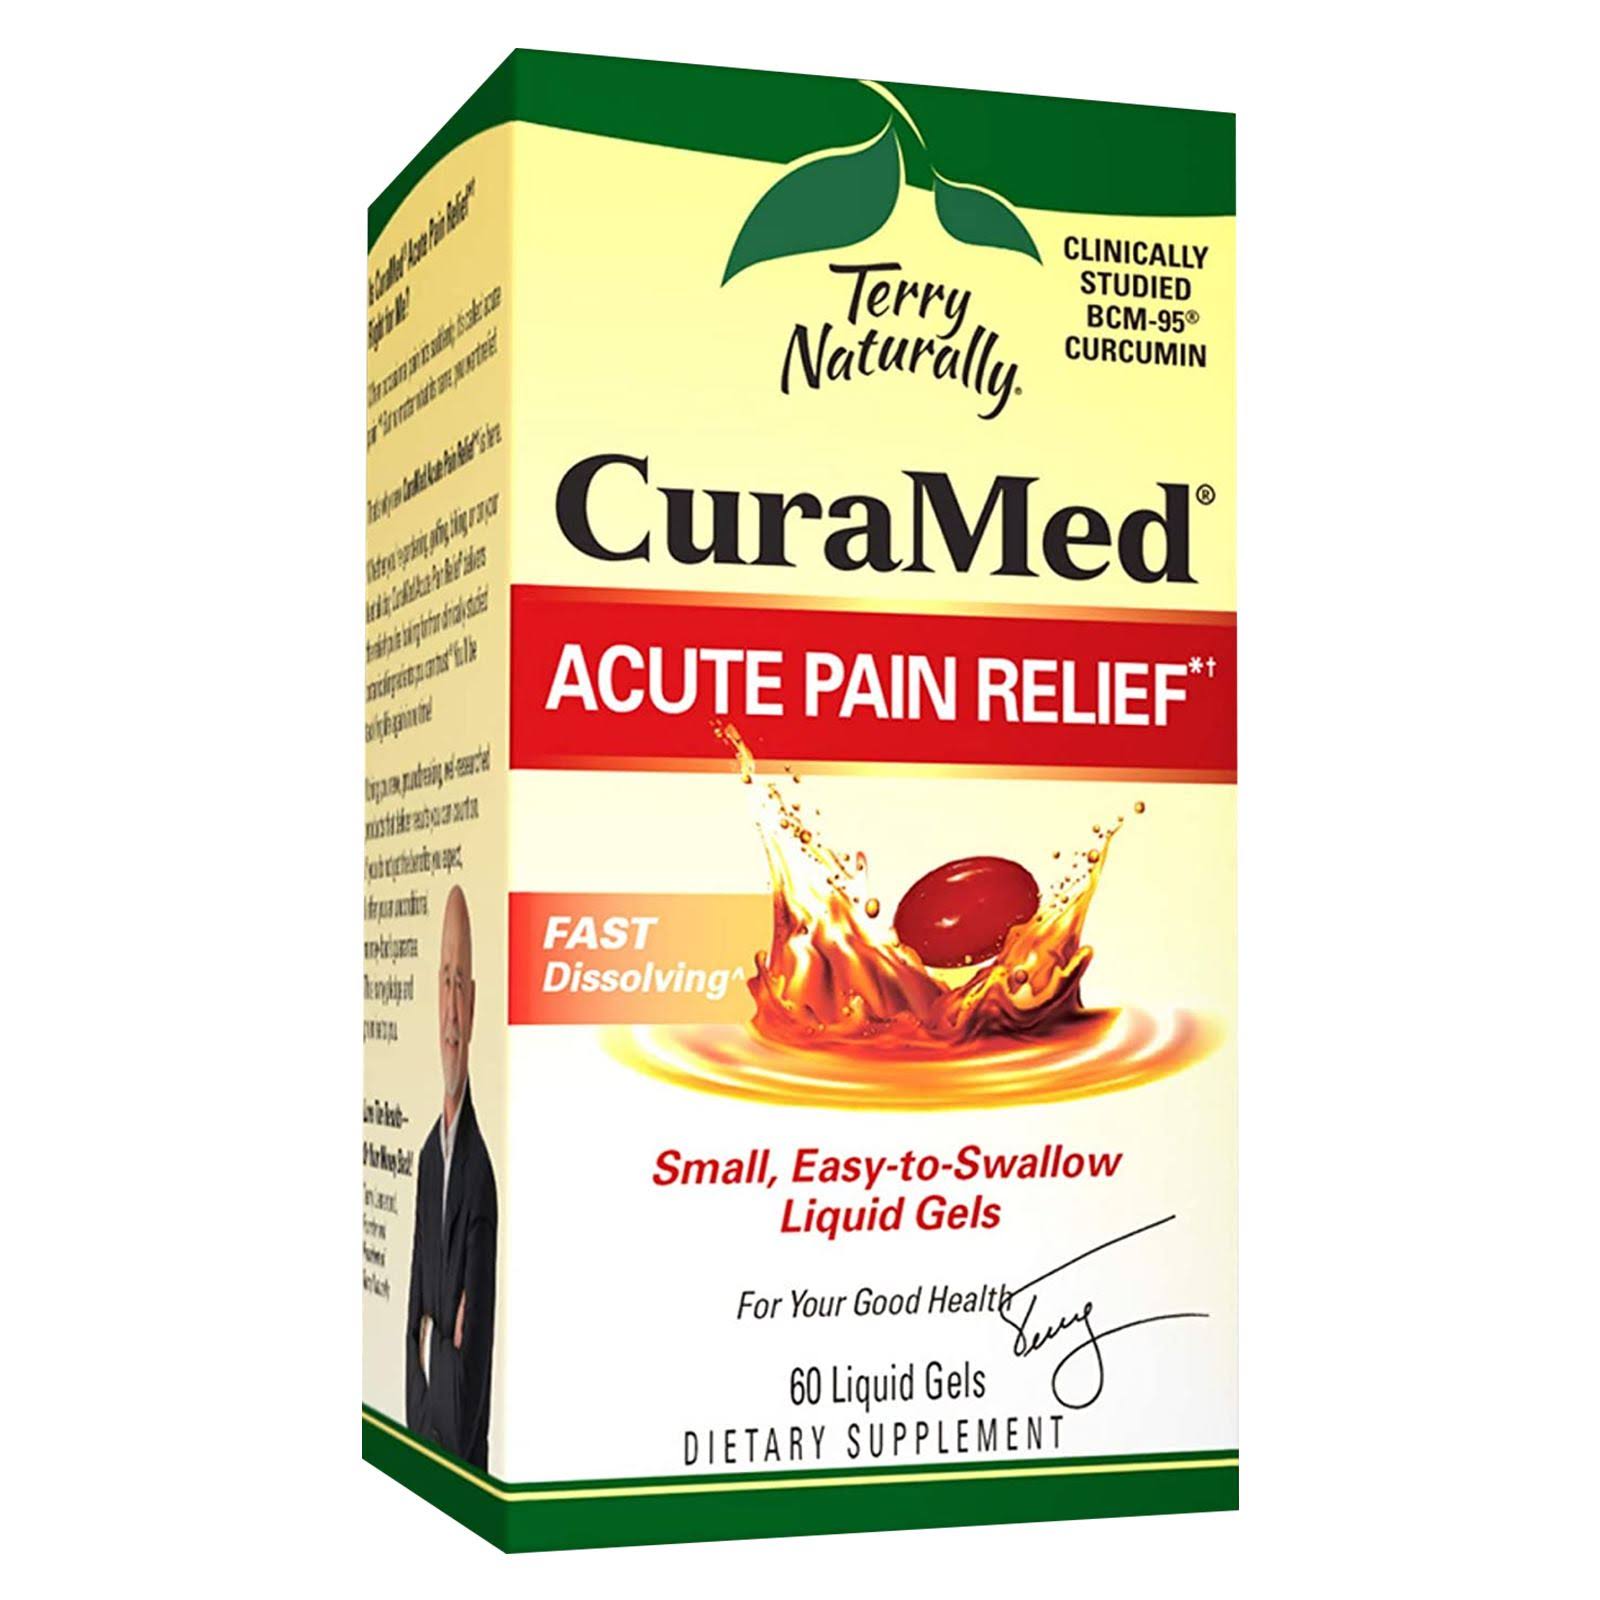 Terry Naturally, CuraMed, Acute Pain Relief, 60 Liquid Gels